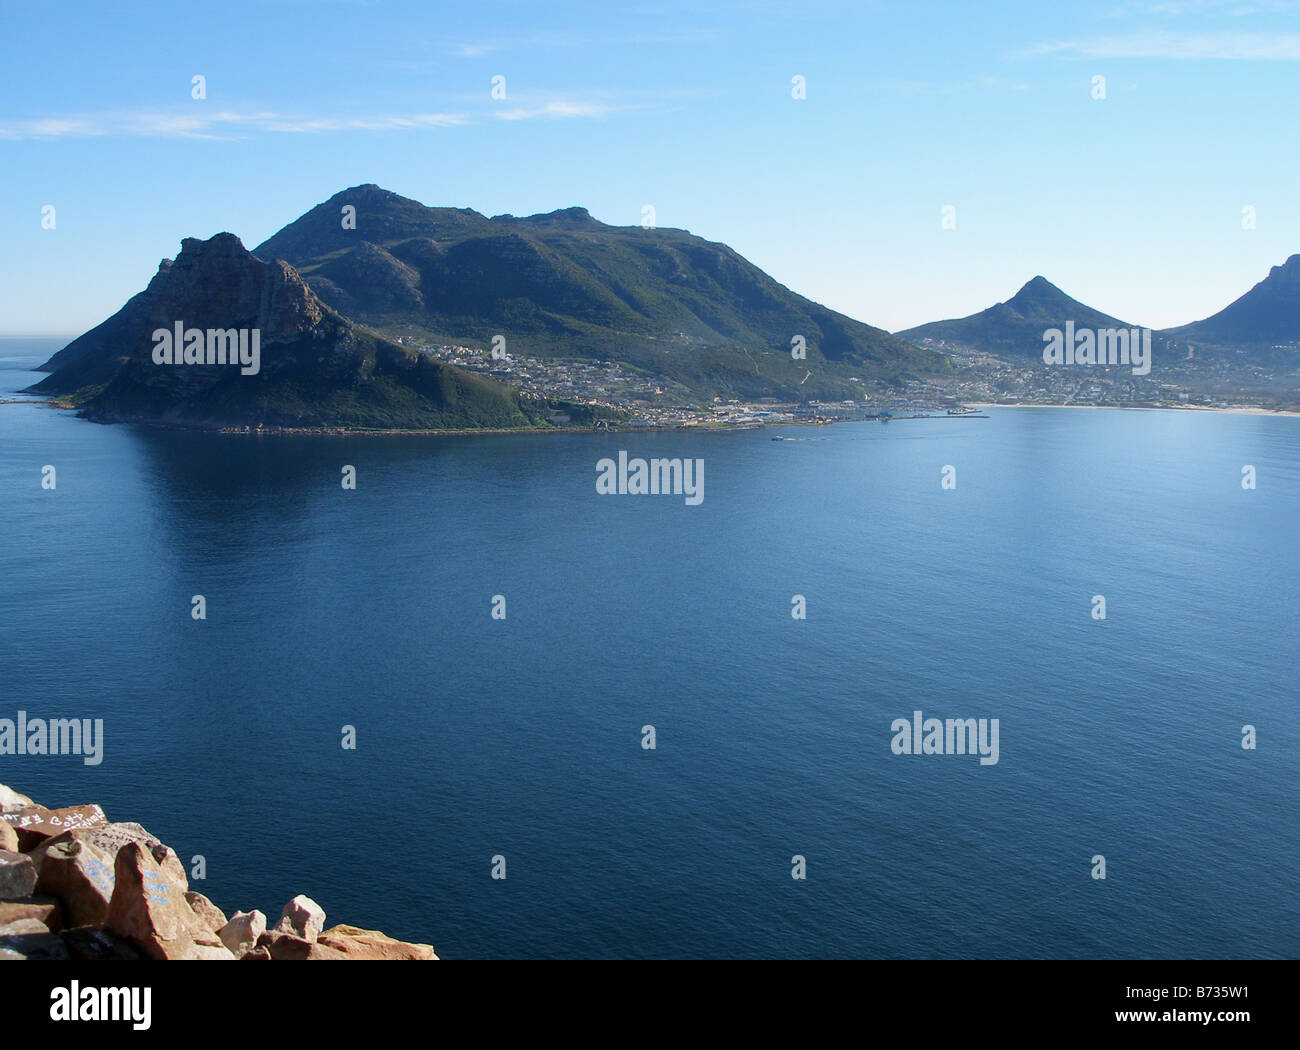 Hout Bay seen from the road to Chapman's Peak on the Atlantic Ocean between Cape Town and the Cape of Good Hope, South Africa Stock Photo